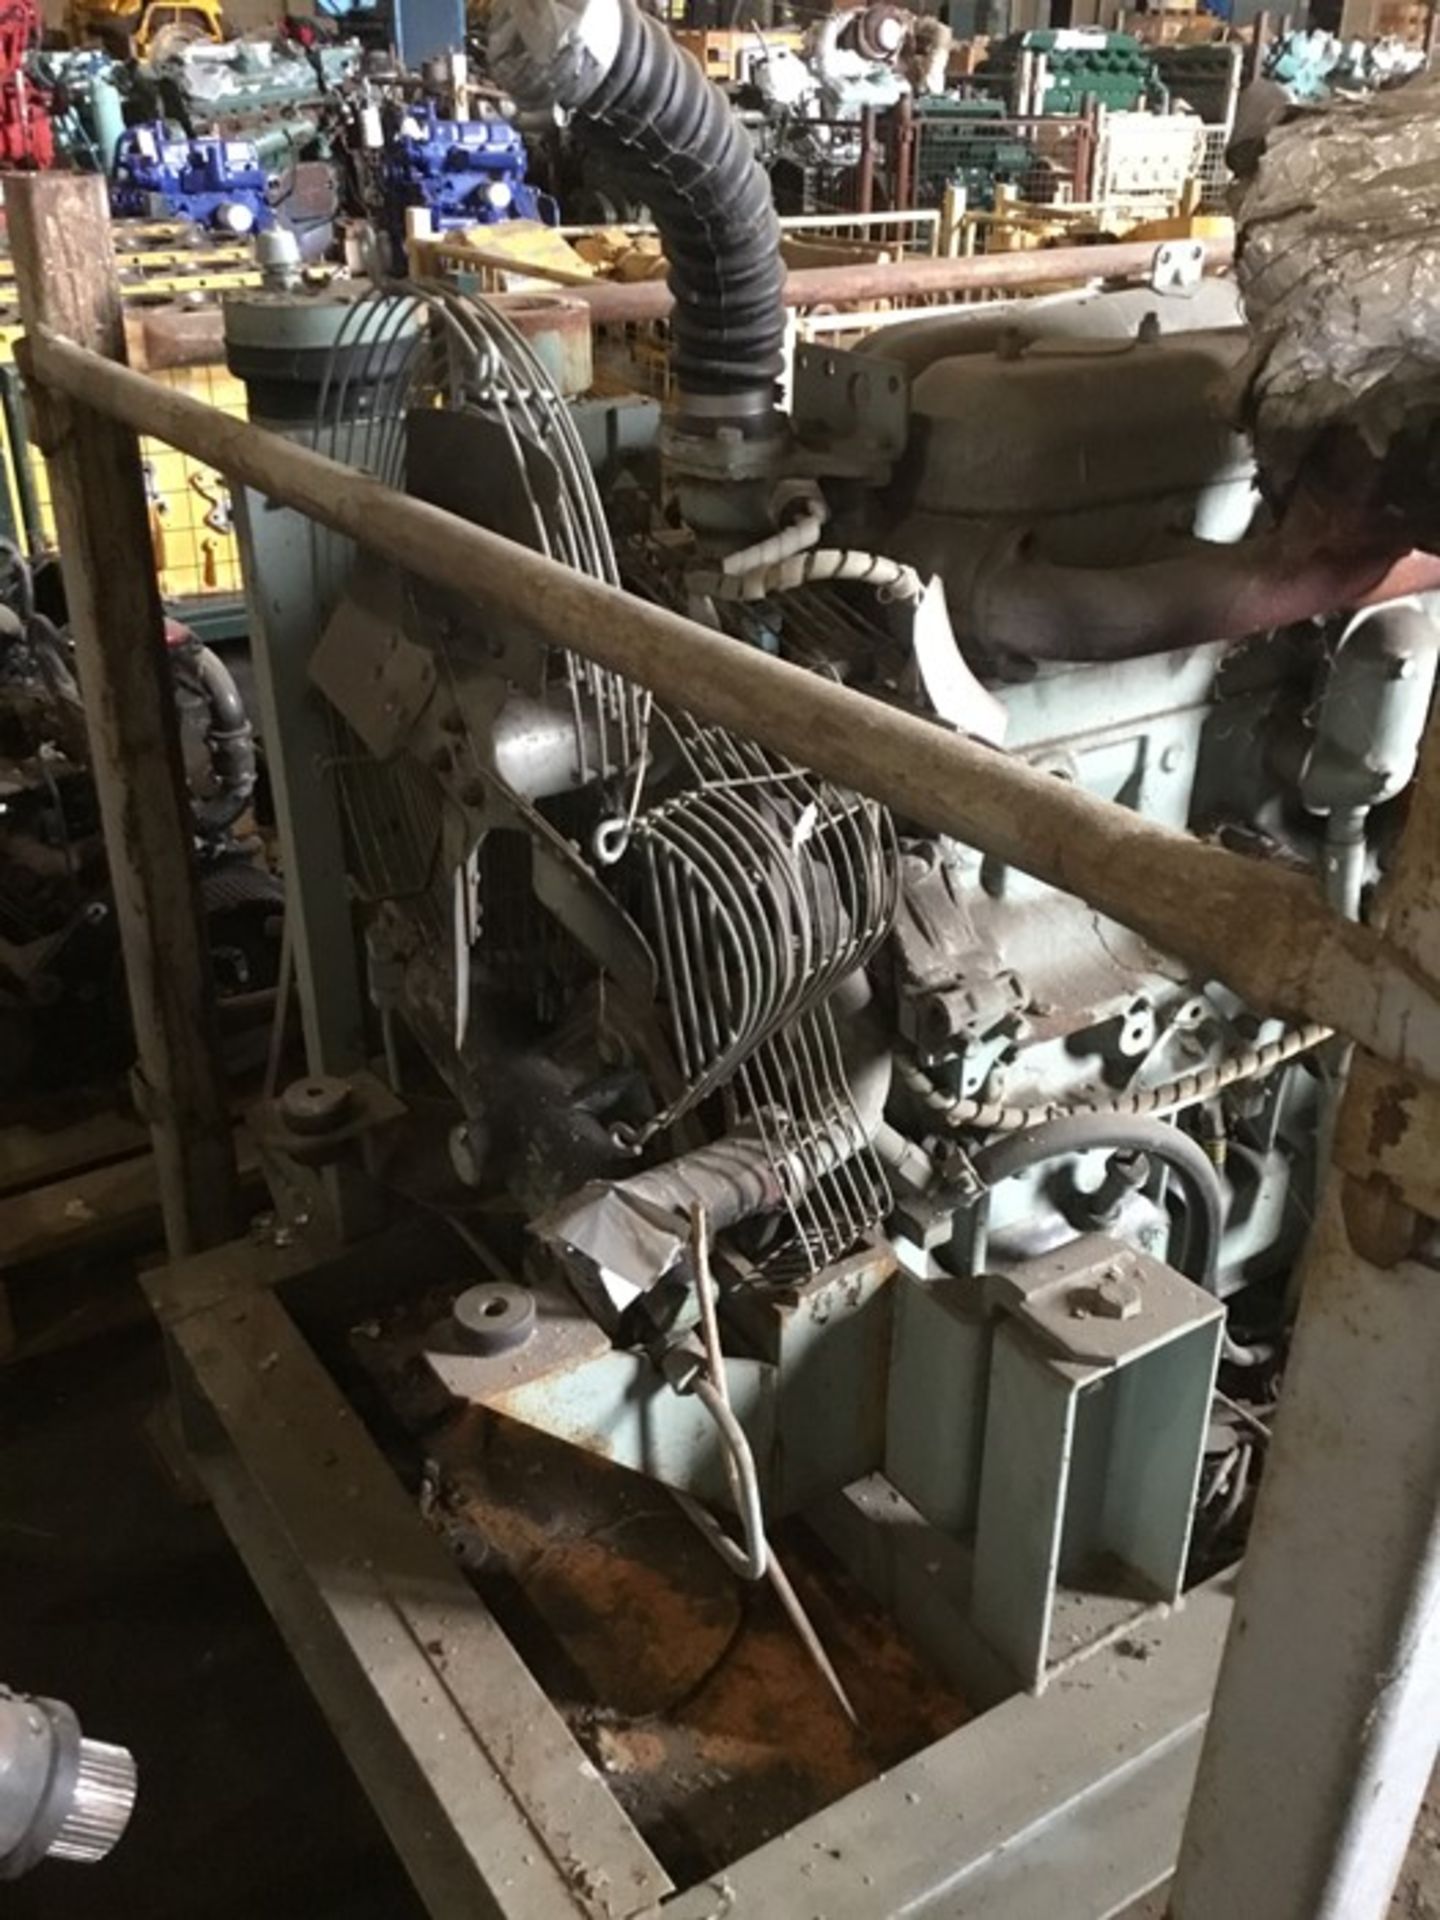 Iveco 8041 Diesel engine: Iveco 8041.04 4cyl non Turbo, Serial 8041.0*306-747516 Incomplete - Image 3 of 15